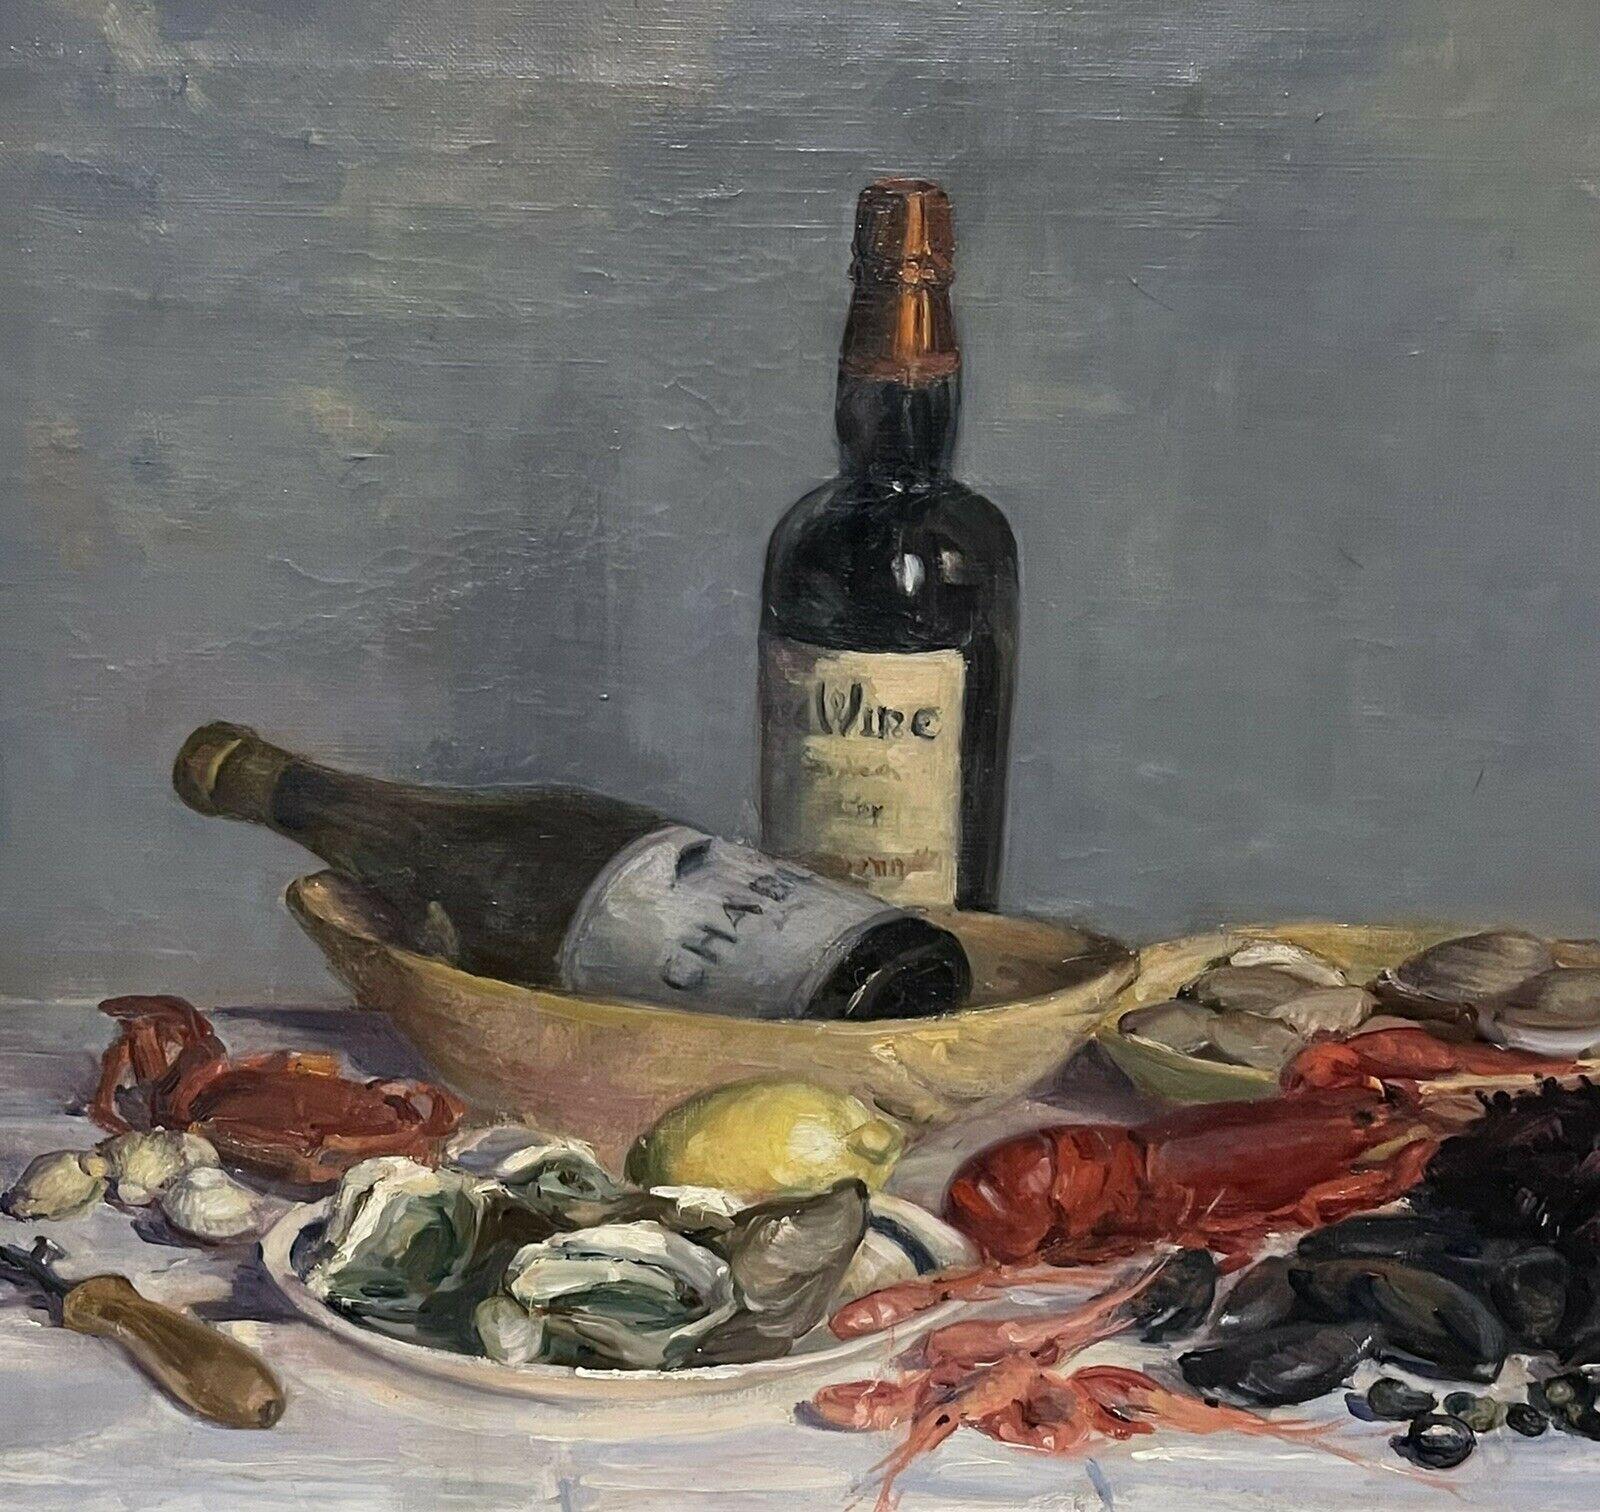 Artist/ School: French artist, circa 1950s, signed to the lower corner

Title: Sea Food Table (wine bottle, lobster, oysters, etc)

Medium: oil painting on canvas, framed

Size:

framed:27.25 x 31.5 inches
canvas: 21.25 x 25.5 inches
depth: 3